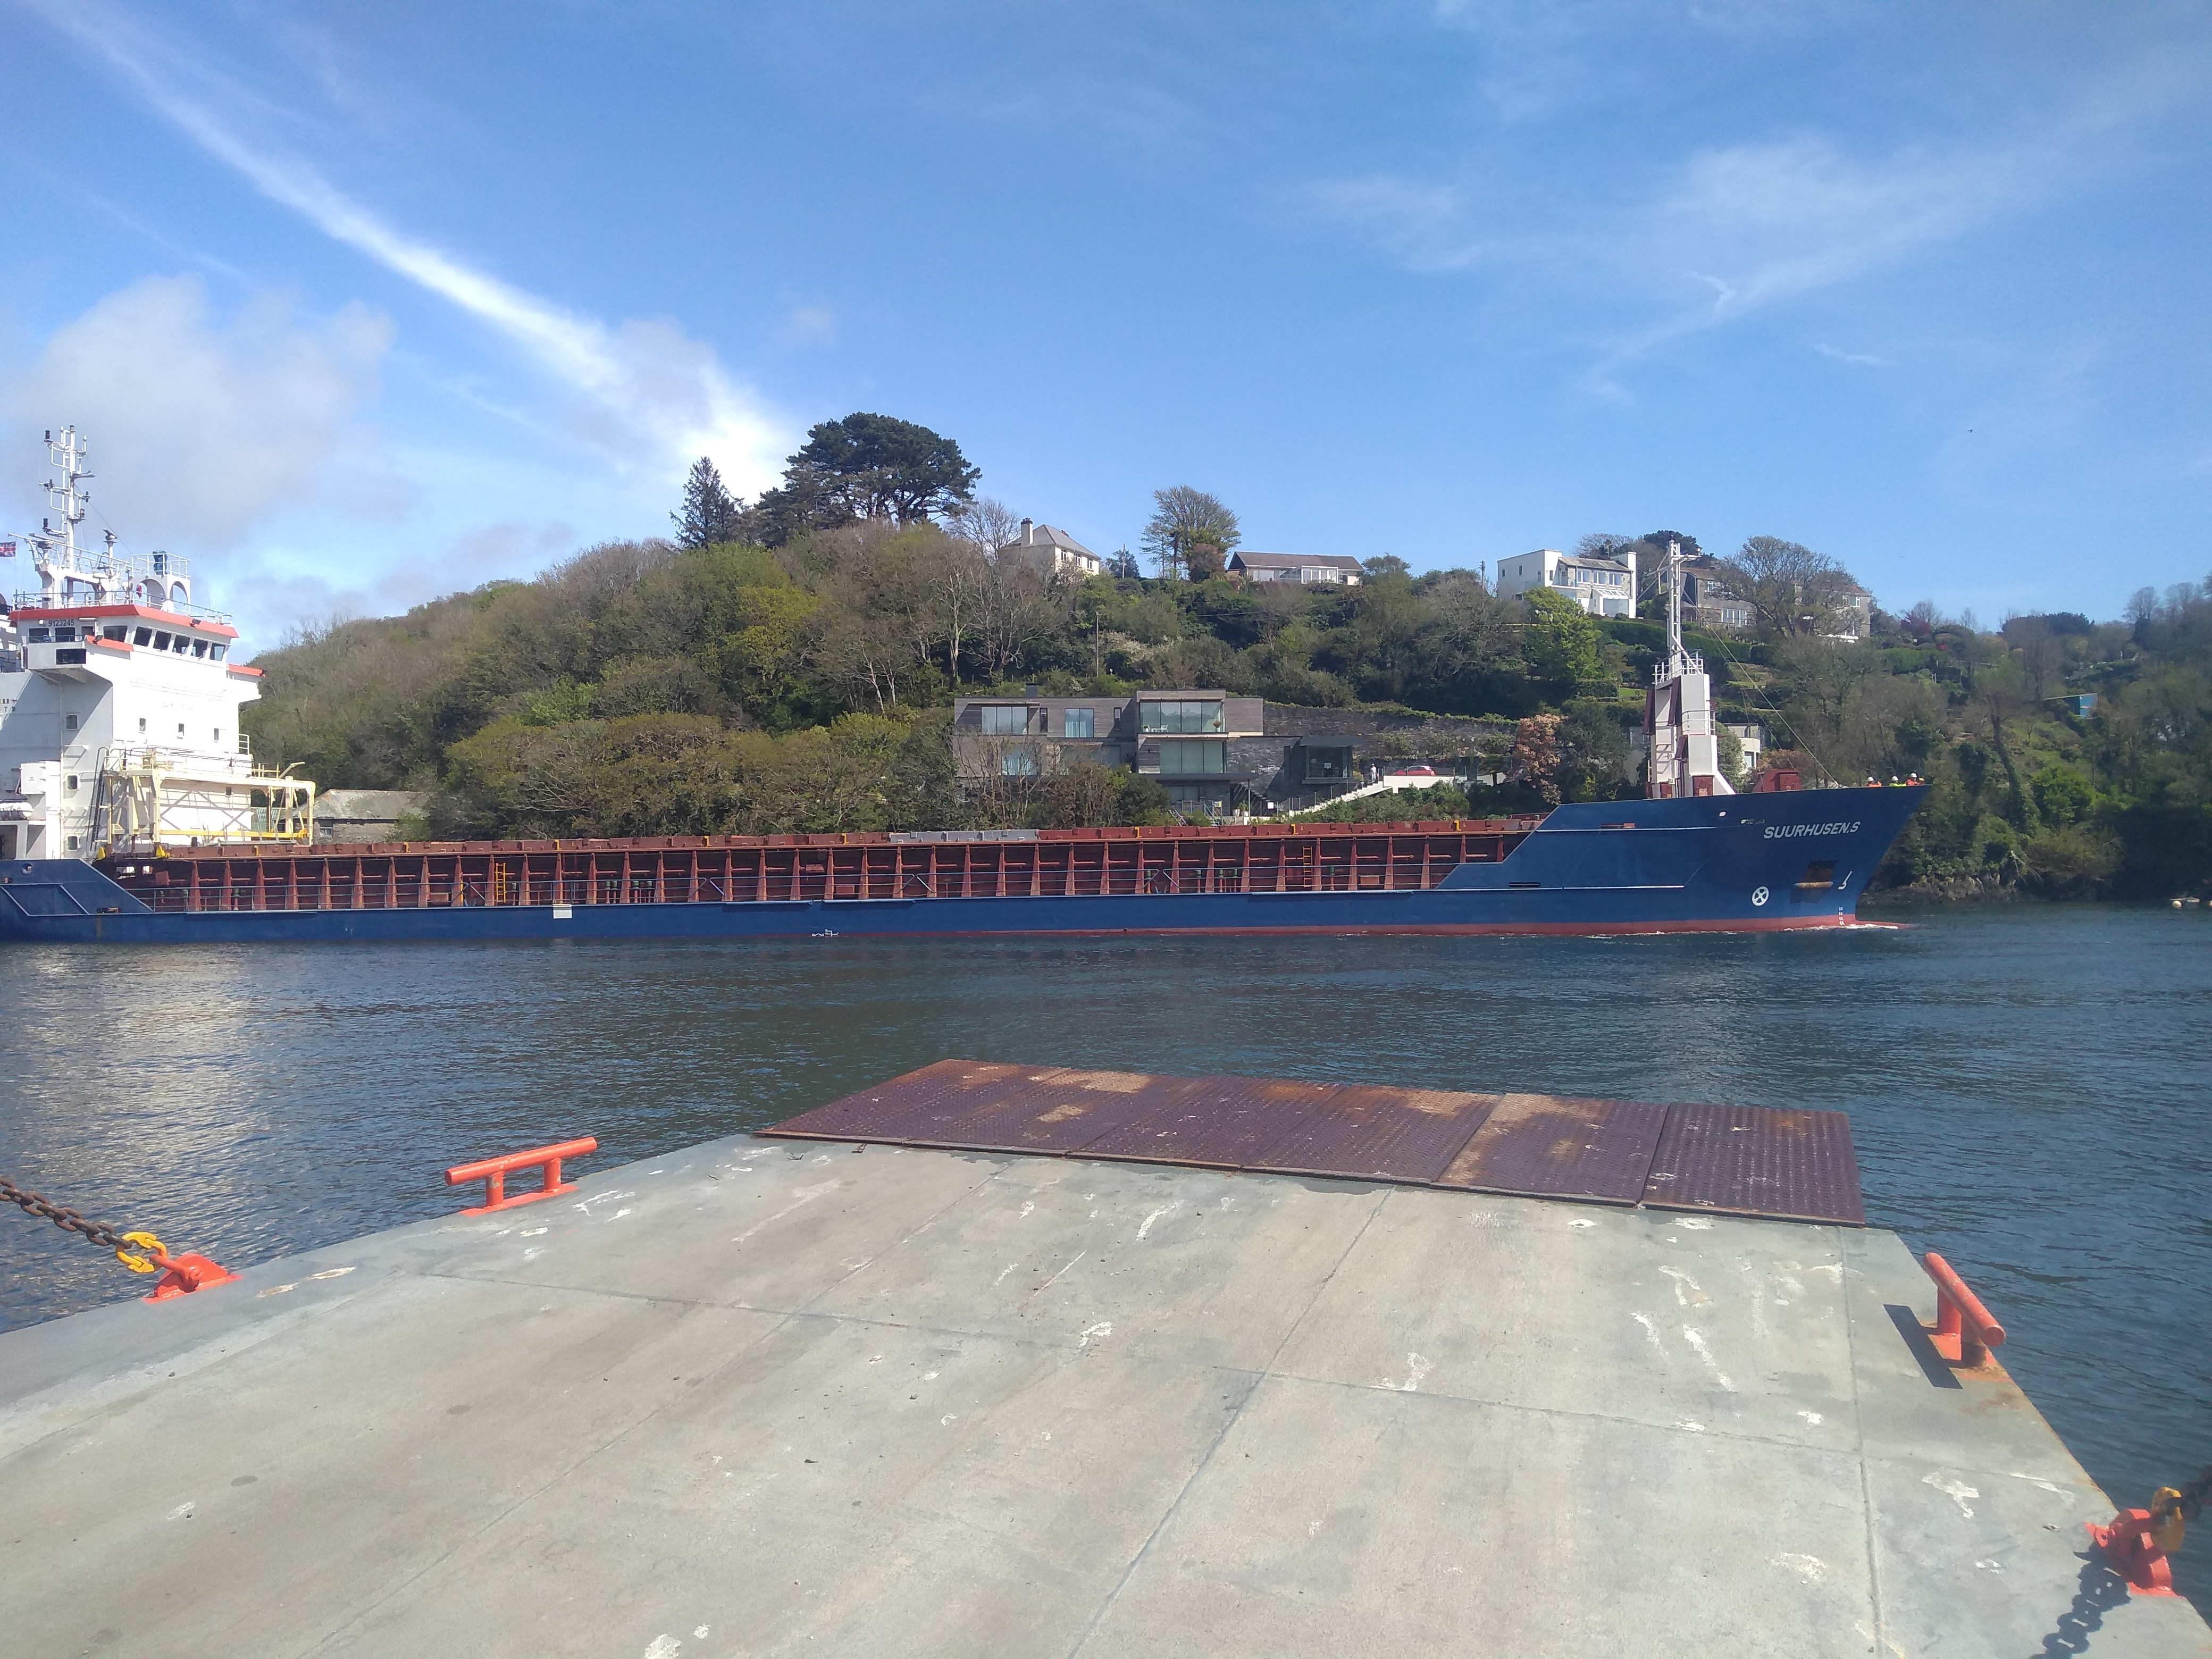 Big ship in front of the Fowey River ferry